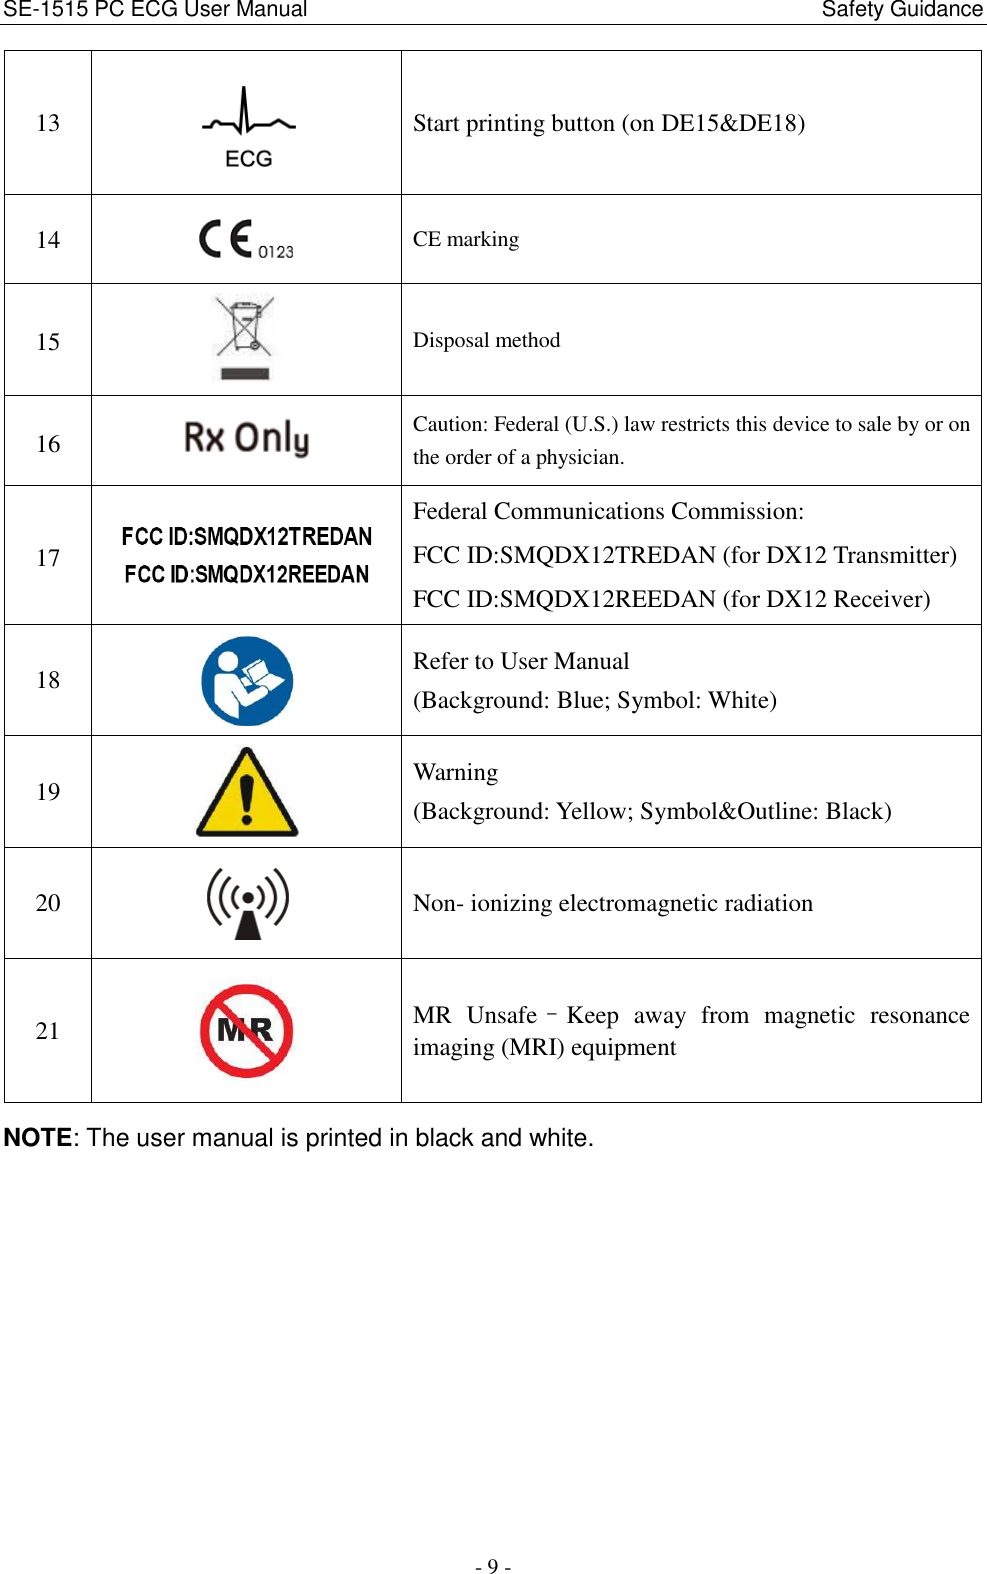 SE-1515 PC ECG User Manual                                                                                            Safety Guidance - 9 - 13  Start printing button (on DE15&amp;DE18) 14  CE marking 15  Disposal method 16  Caution: Federal (U.S.) law restricts this device to sale by or on the order of a physician. 17   Federal Communications Commission:   FCC ID:SMQDX12TREDAN (for DX12 Transmitter) FCC ID:SMQDX12REEDAN (for DX12 Receiver) 18  Refer to User Manual (Background: Blue; Symbol: White) 19  Warning (Background: Yellow; Symbol&amp;Outline: Black) 20  Non- ionizing electromagnetic radiation 21  MR  Unsafe–Keep  away  from  magnetic  resonance imaging (MRI) equipment NOTE: The user manual is printed in black and white. 